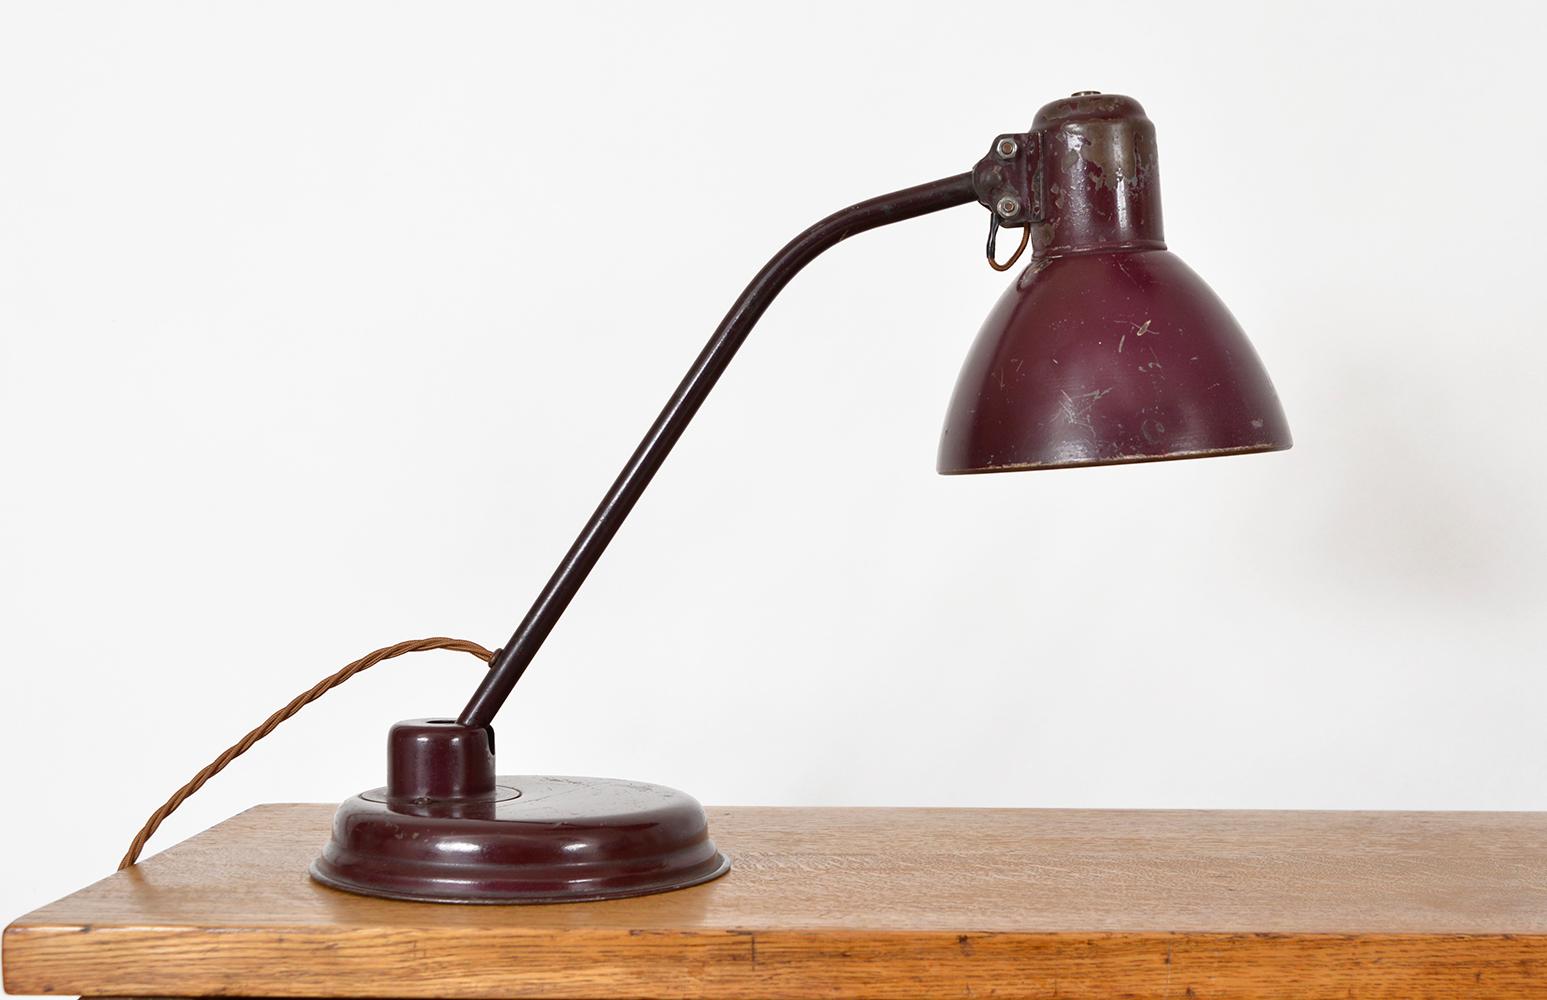 A lovely patinated articulated desk lamp in original burgundy/aubergine coloured paint. Sat on a metal round stepped base, which is weighted, allowing the curved brass rod arm to be manoeuvred forward and back, whilst the lamp shade pivots on a ball